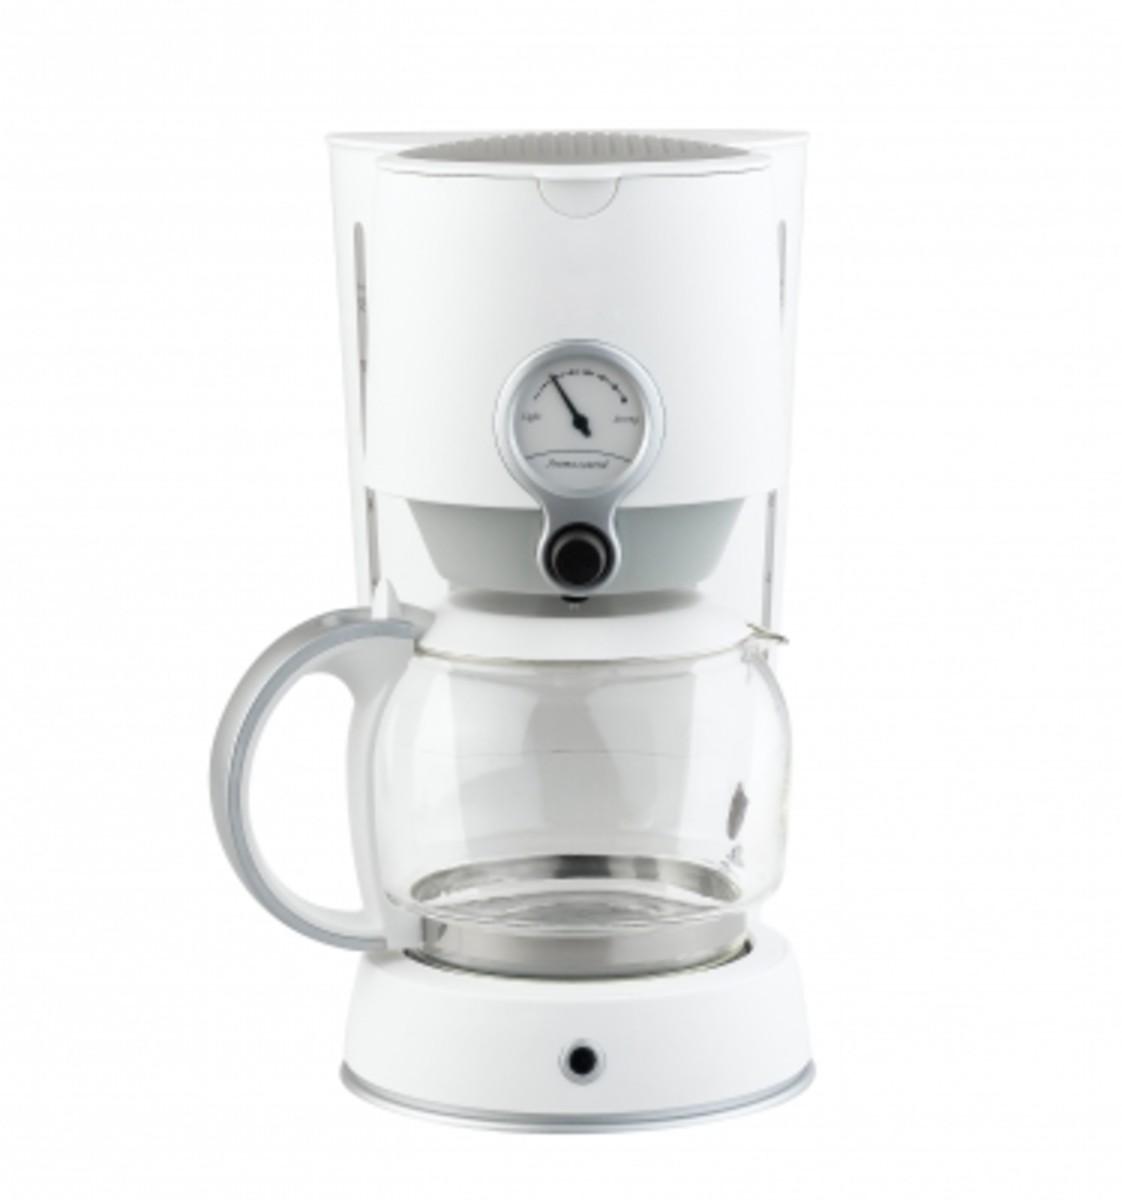 Coffee Makers - Single Serve or Carafe Coffee Brewer?